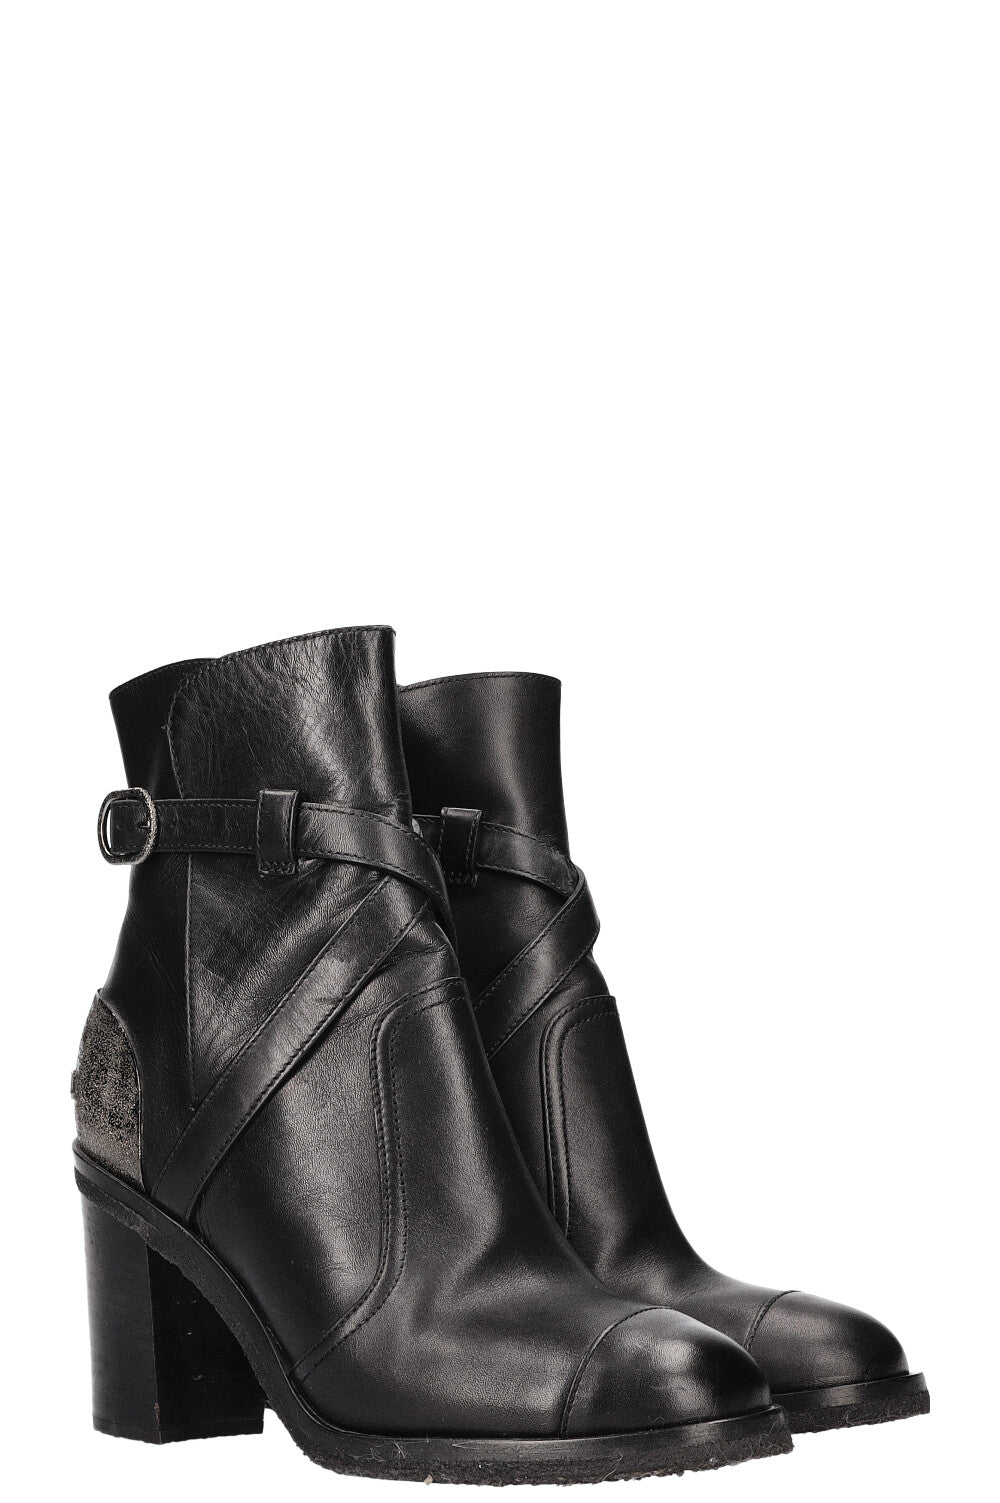 CHANEL Belted Ankle Boots Black